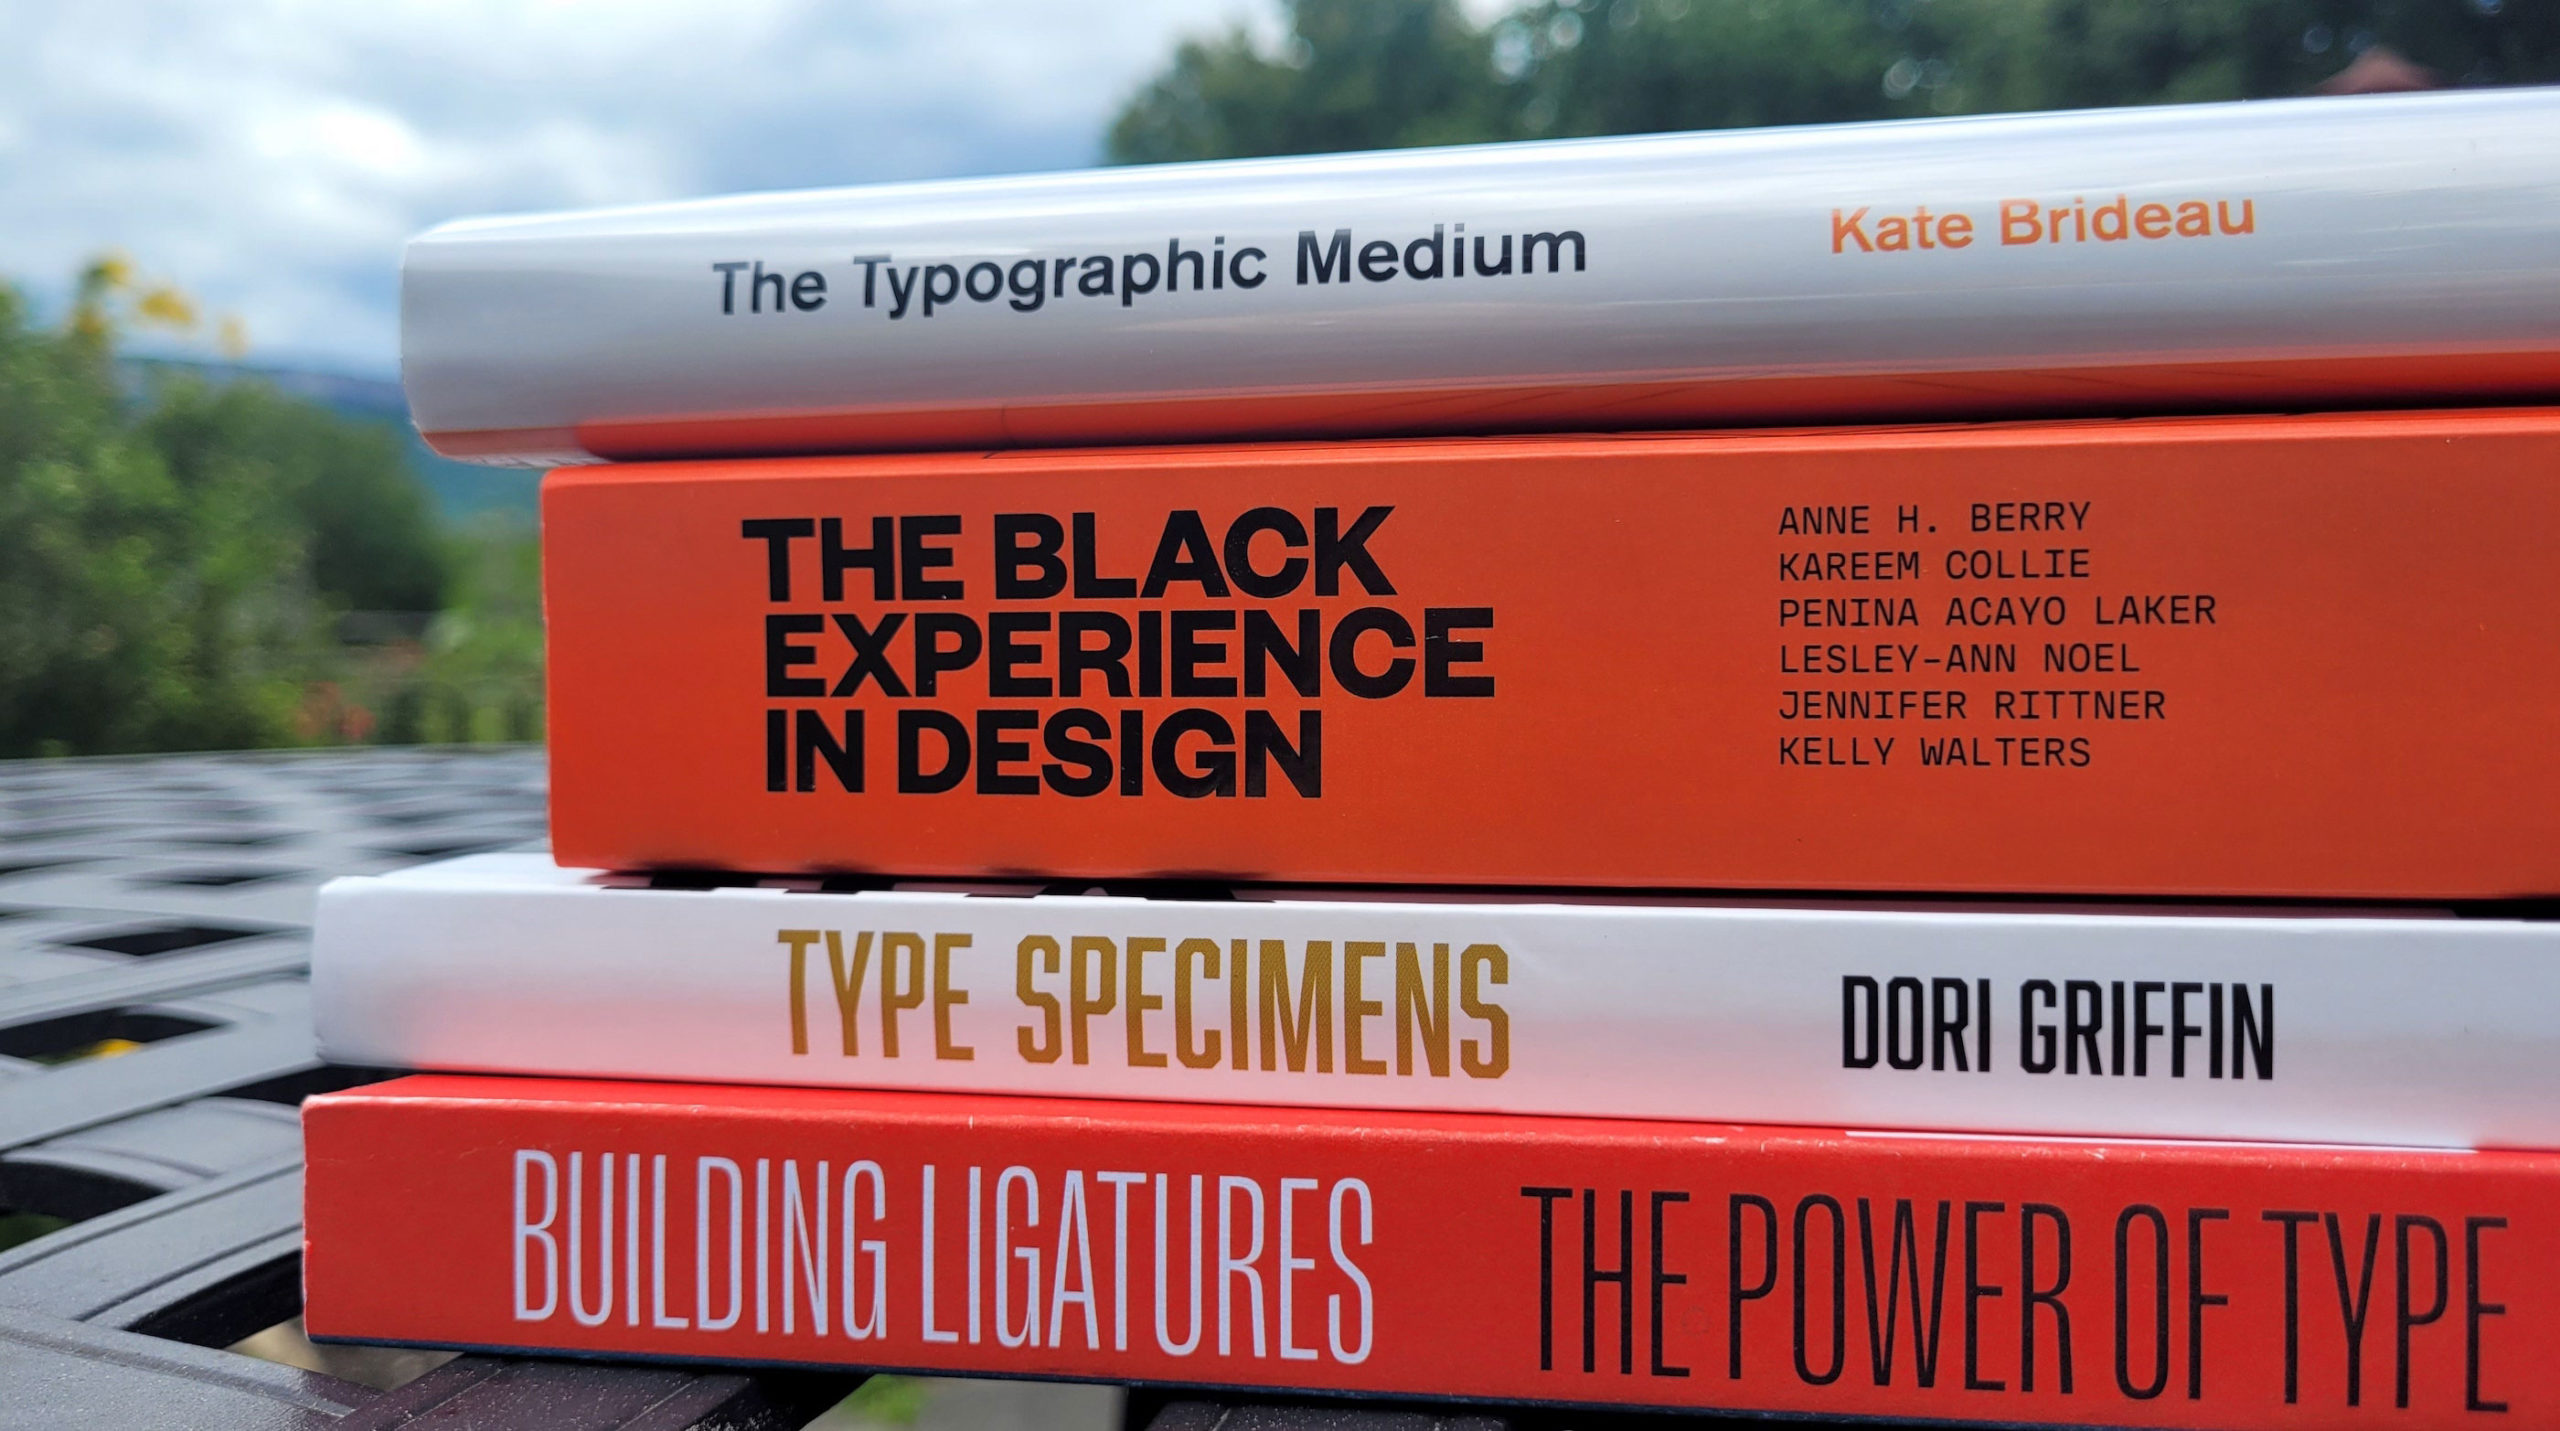 four books stacked on a table outside with some yellow flowers and greenery in the background. The books are from top to bottom: The Typographic Medium, The Black Experience in Design, Type Specimens, and Building Ligatures The Power of Type